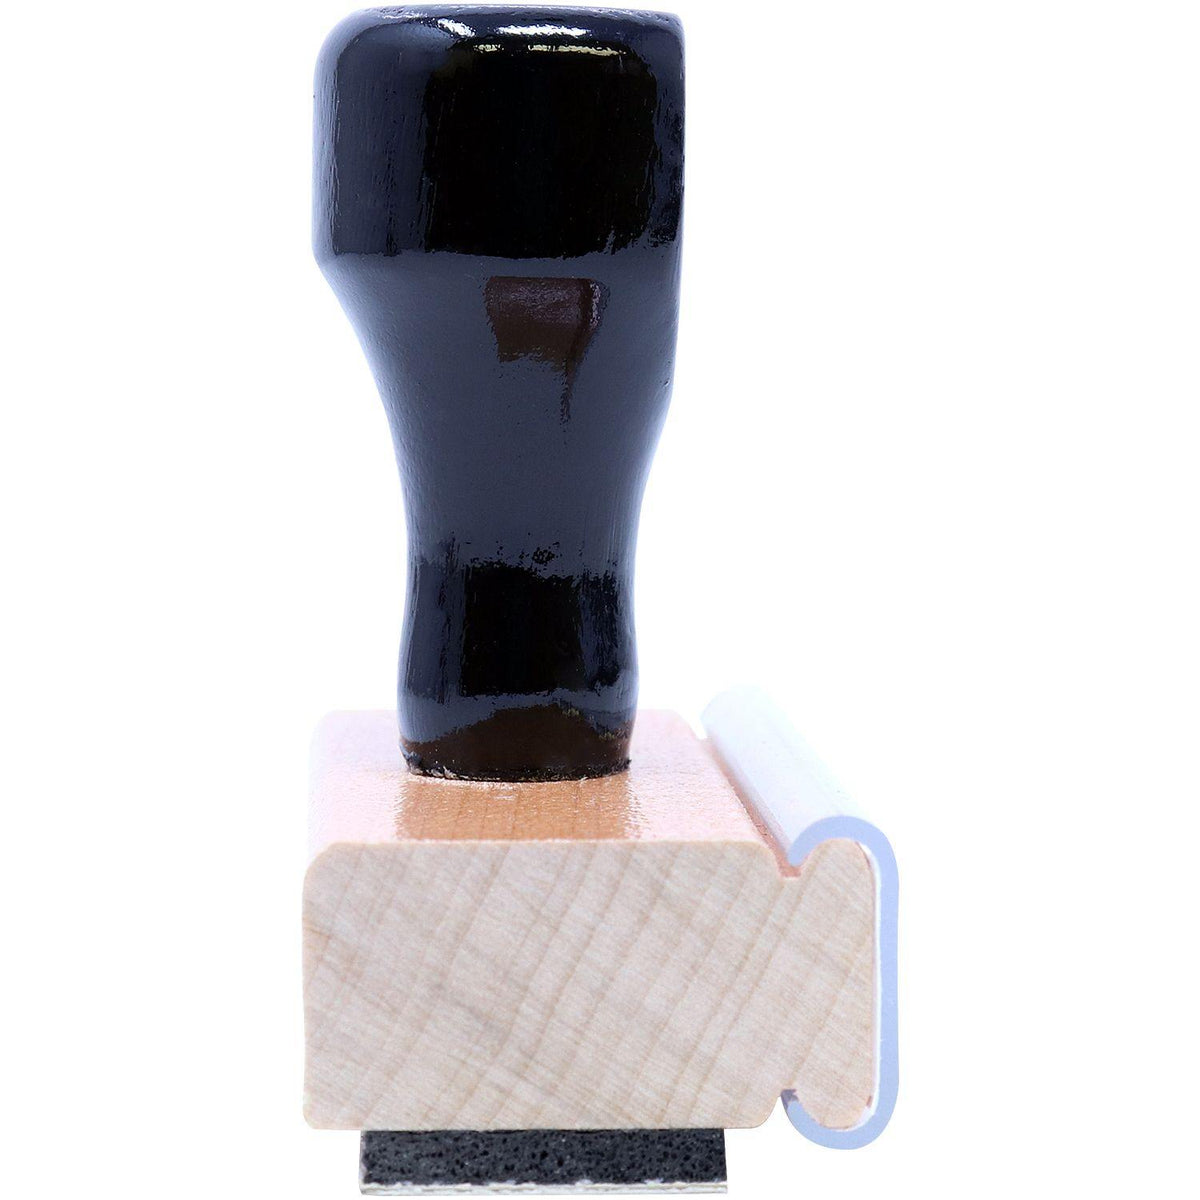 Side View of Large Economy Rate Rubber Stamp